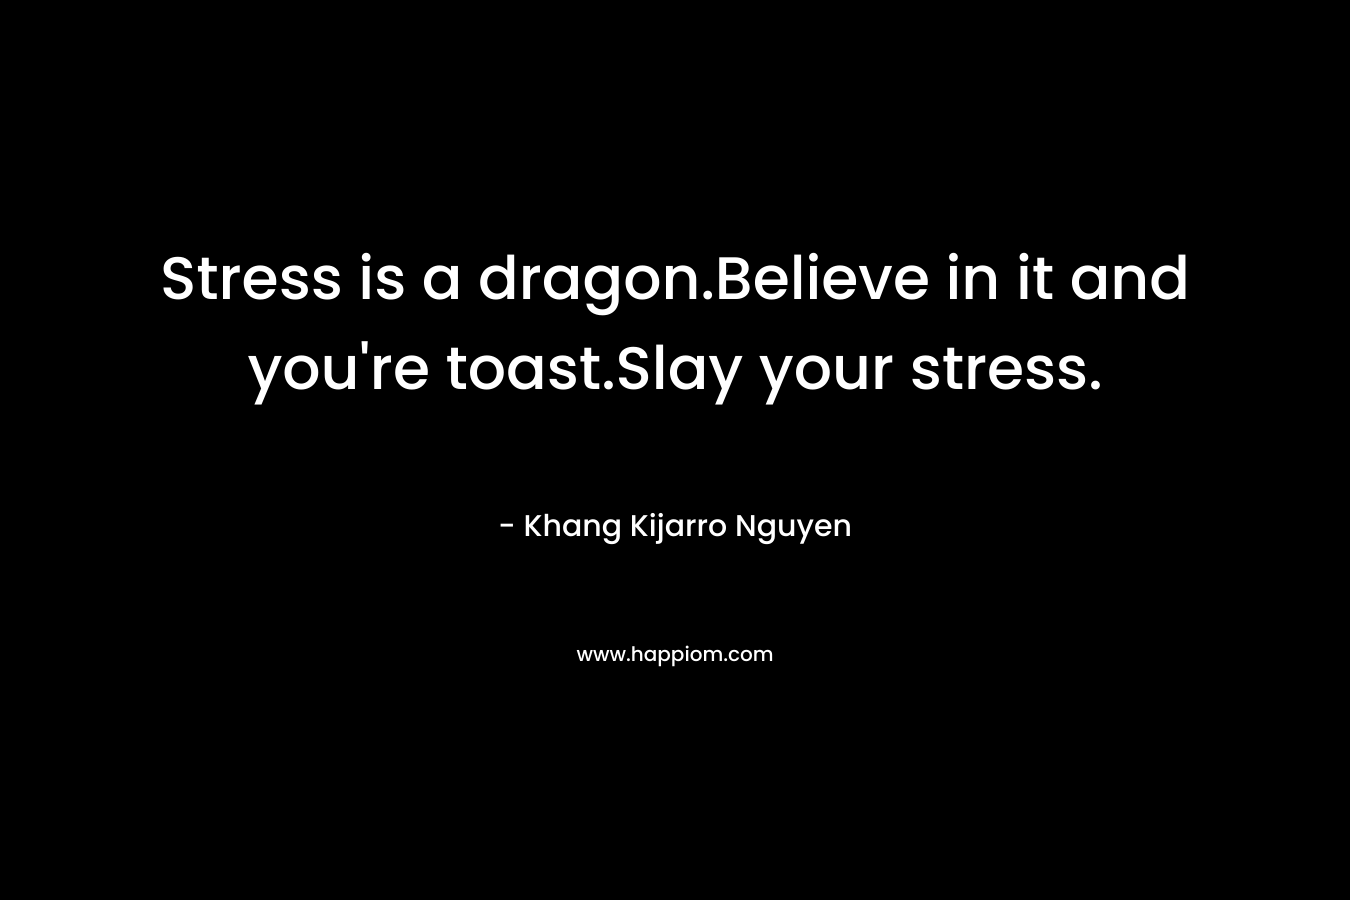 Stress is a dragon.Believe in it and you're toast.Slay your stress.